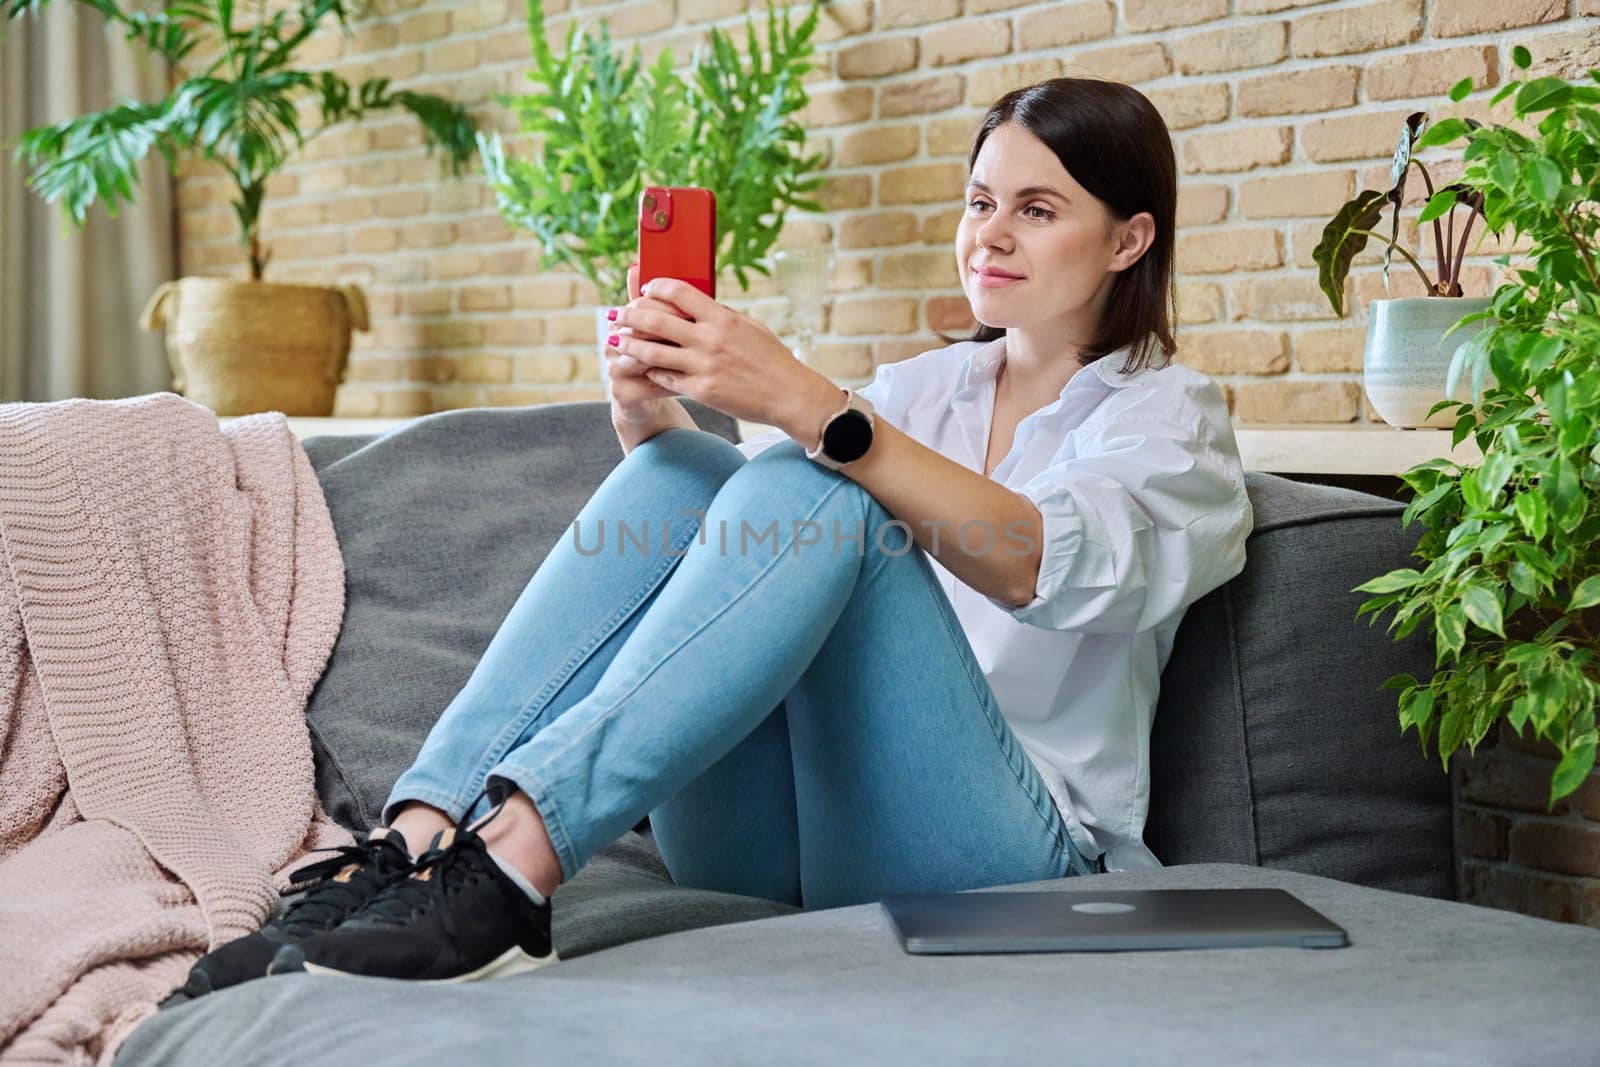 Young smiling happy woman using smartphone, sitting on sofa at home in living room. Internet online services, communication, mobile applications, technologies for leisure study work lifestyle